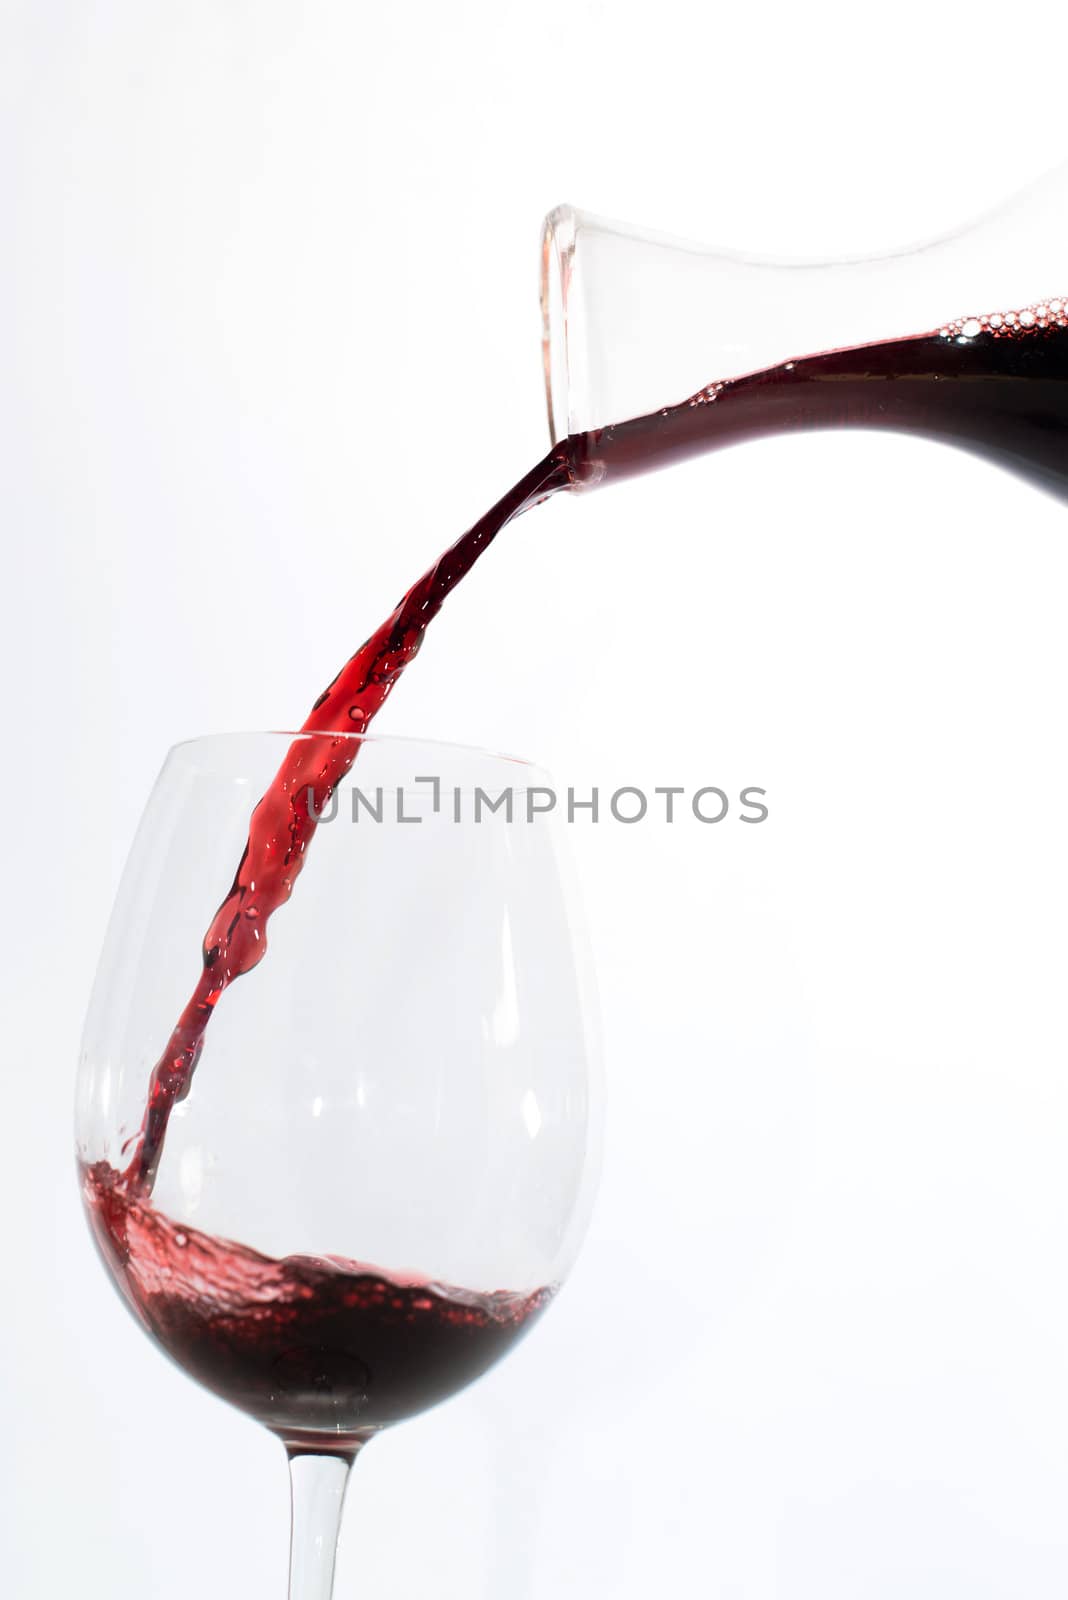 Red wine pouring into a glass by franky242